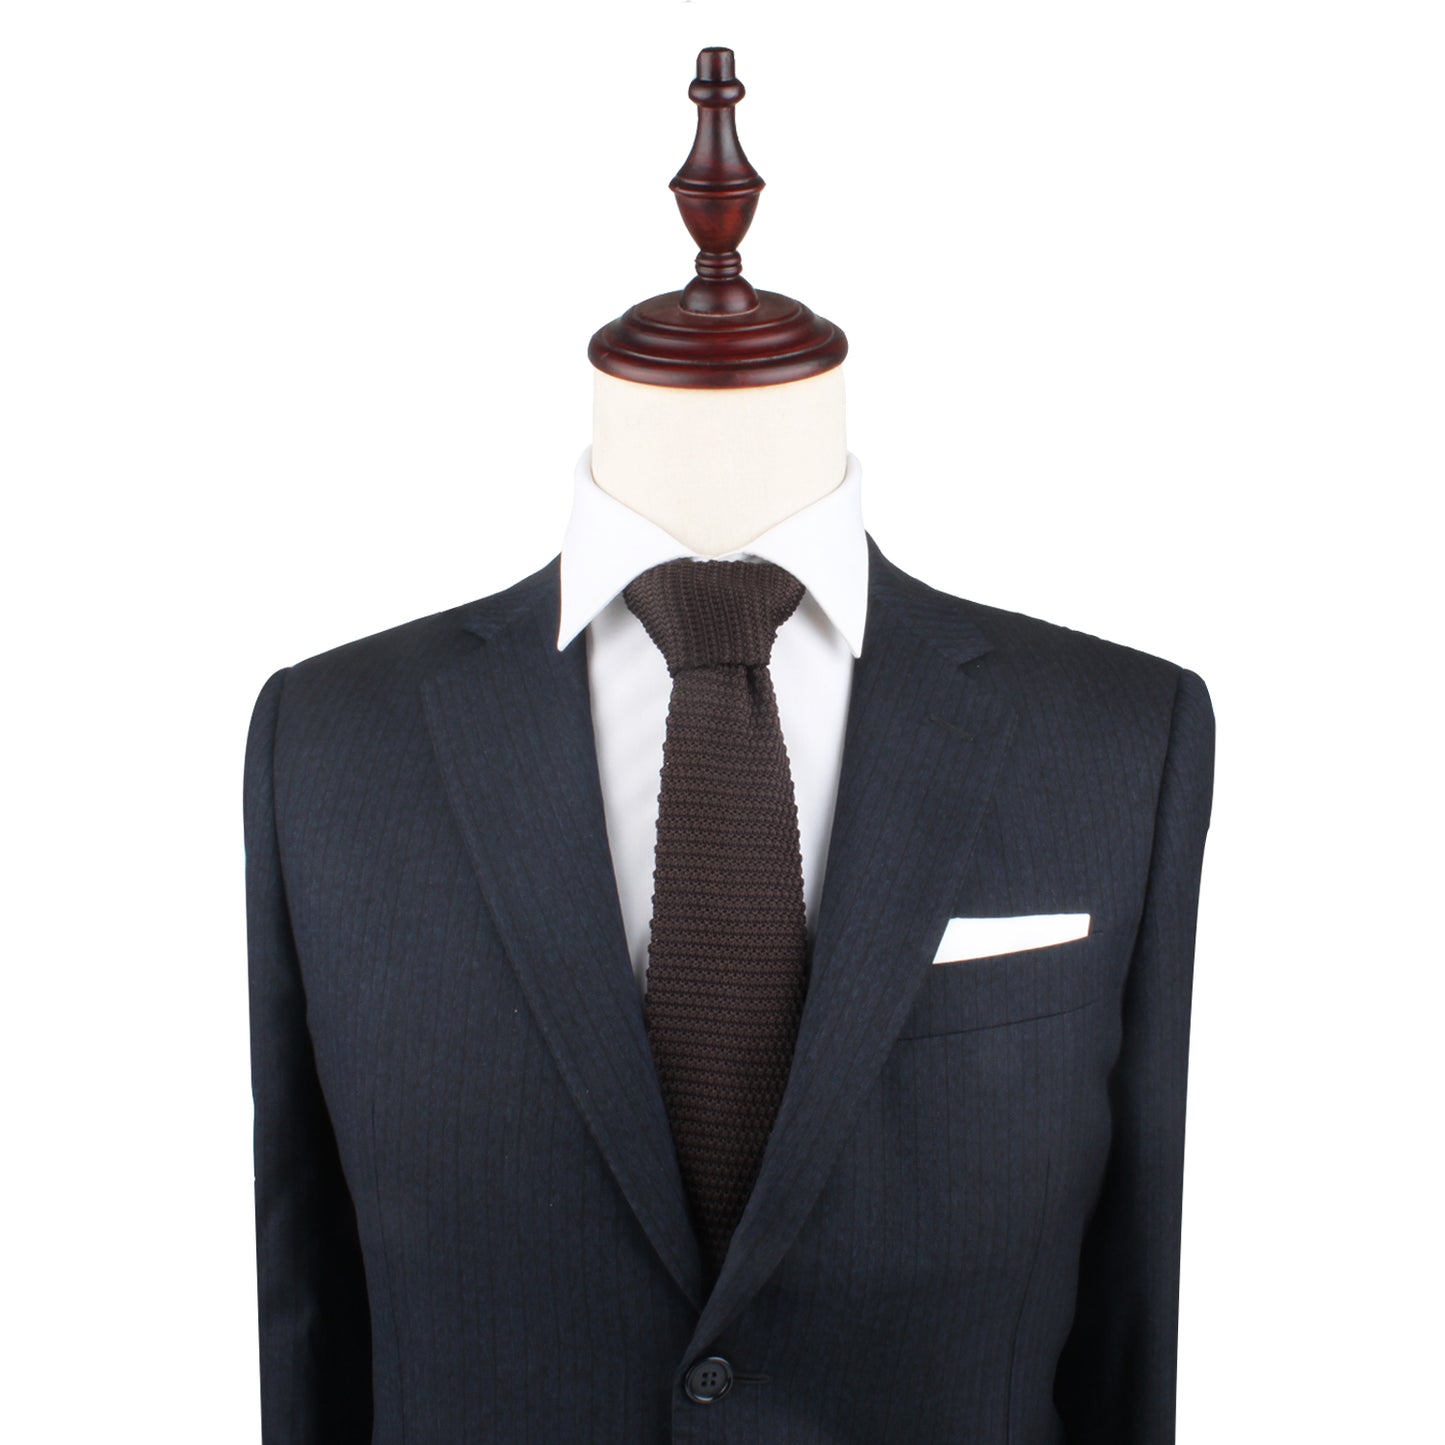 A Brown Knitted Skinny Tie on a mannequin.